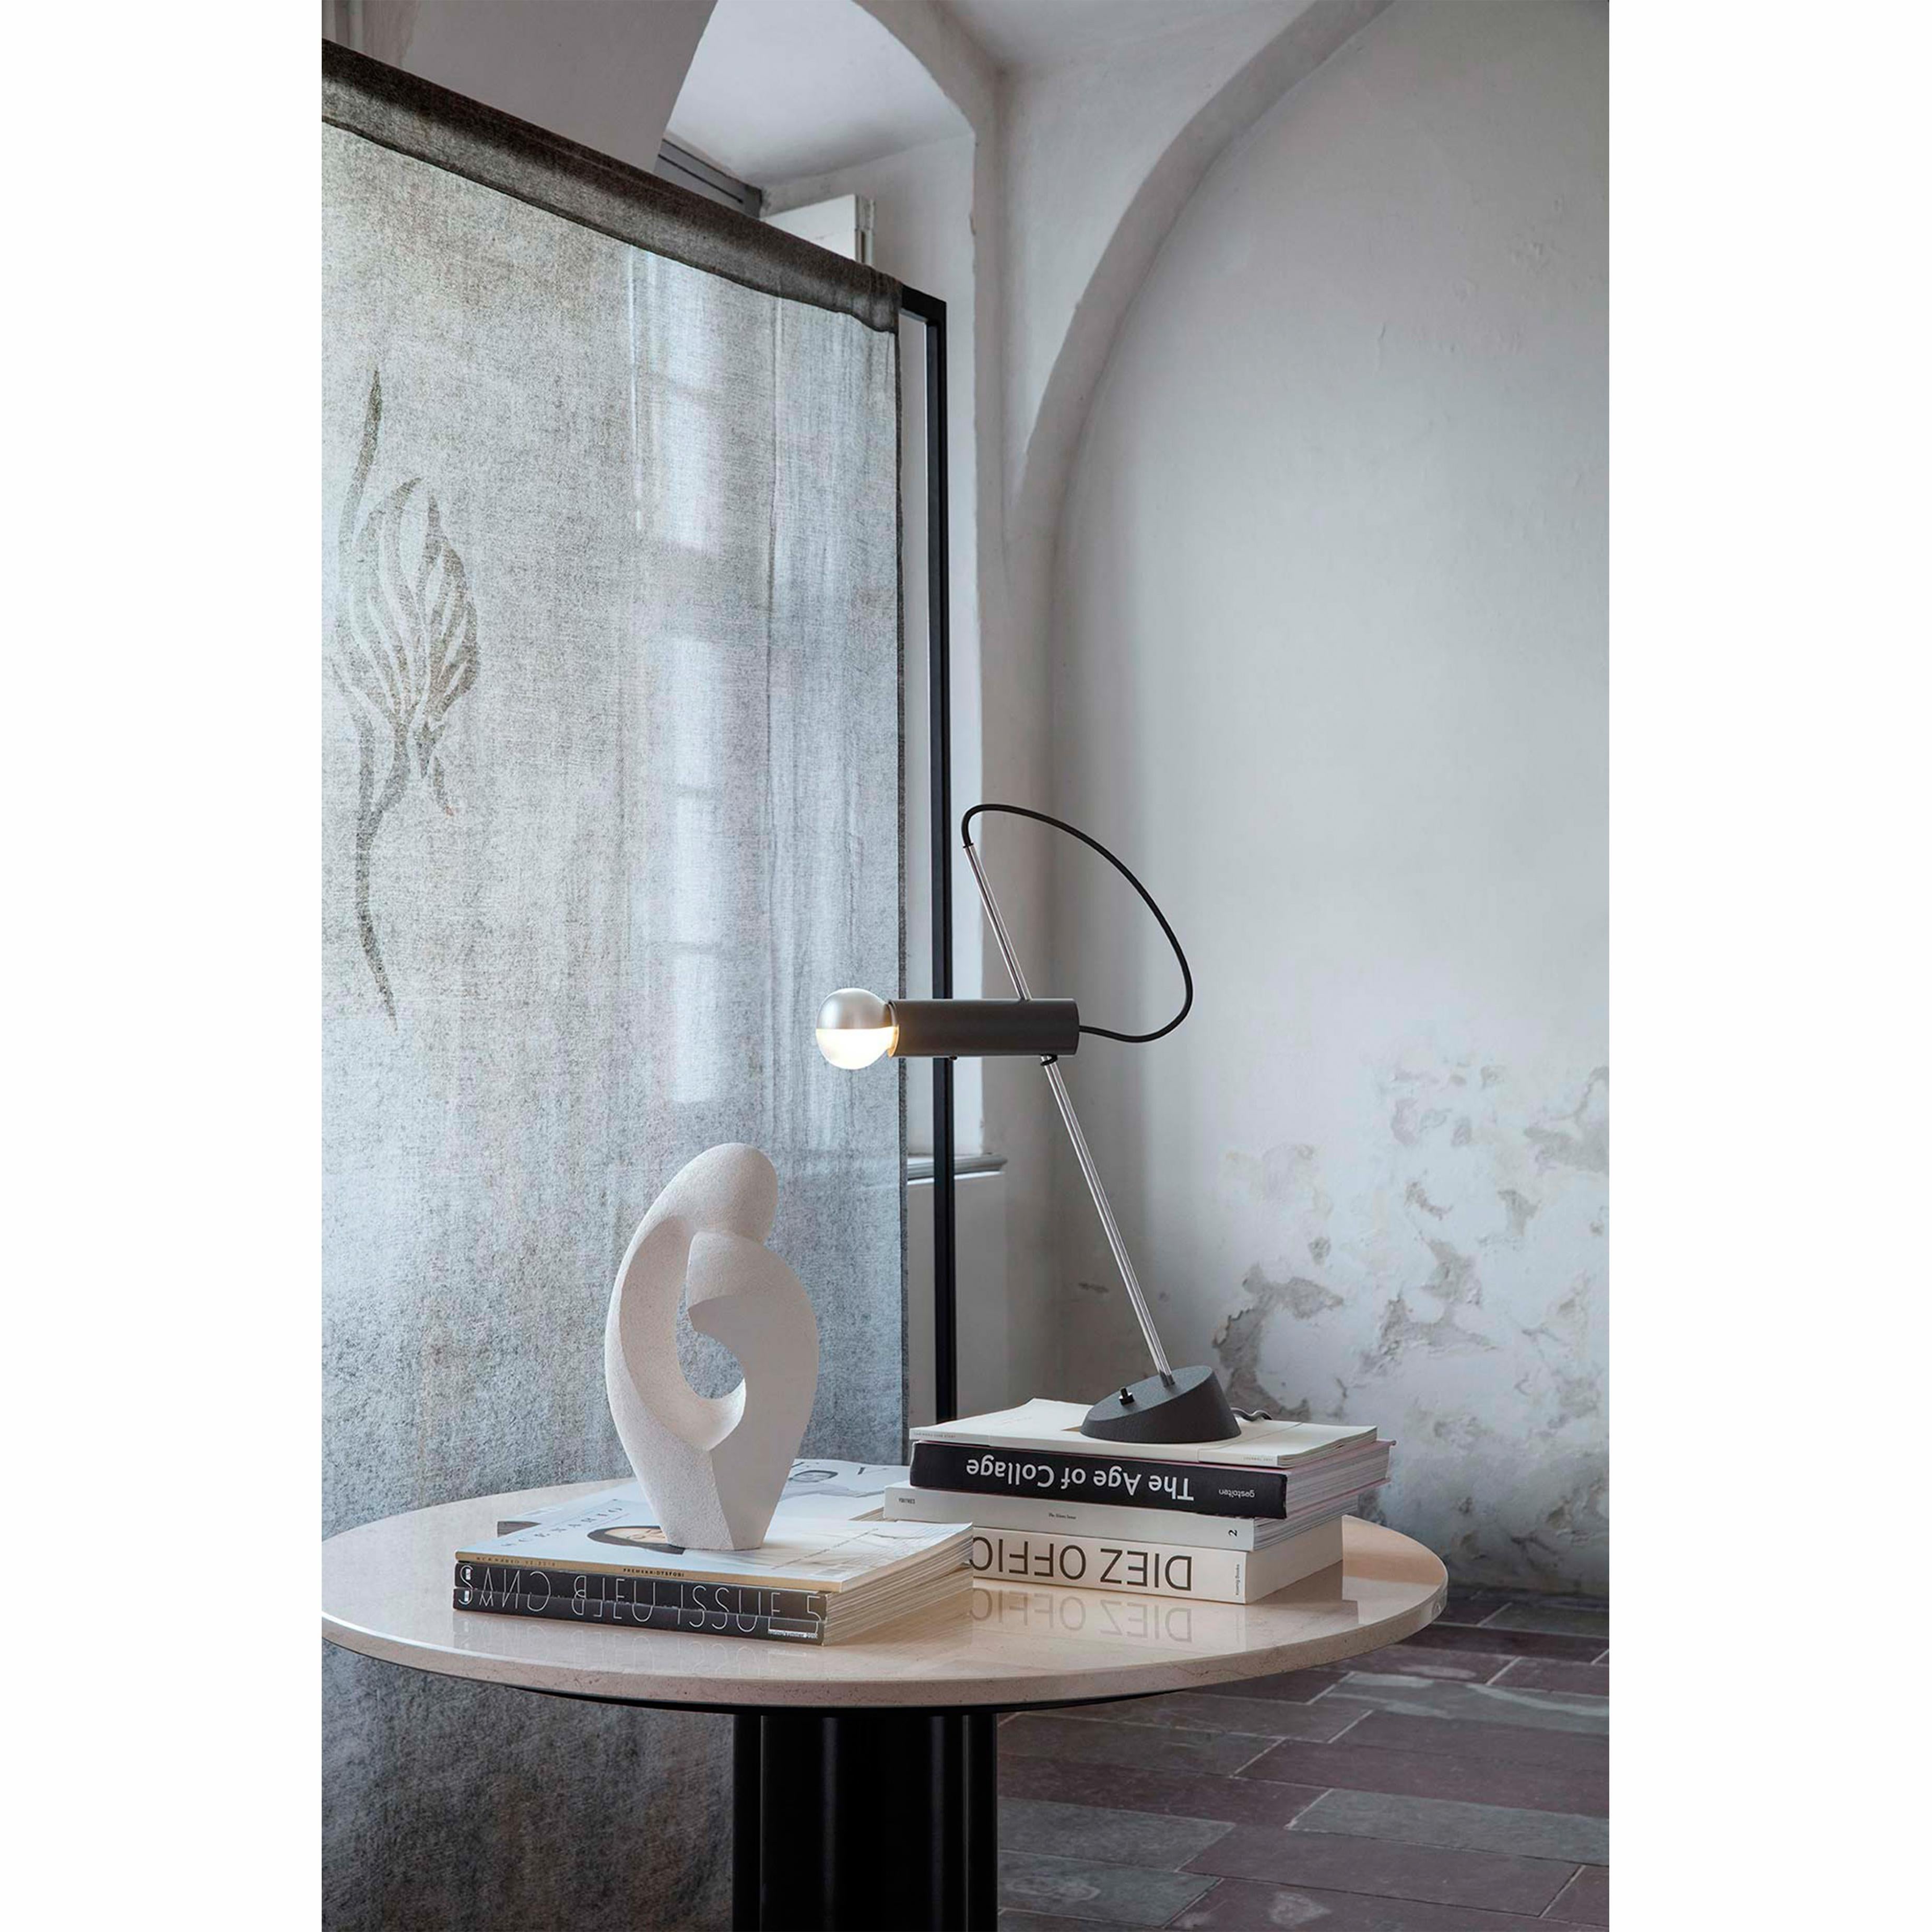 Gino Sarfatti Lamp Model 566 by Astep In New Condition For Sale In Barcelona, Barcelona